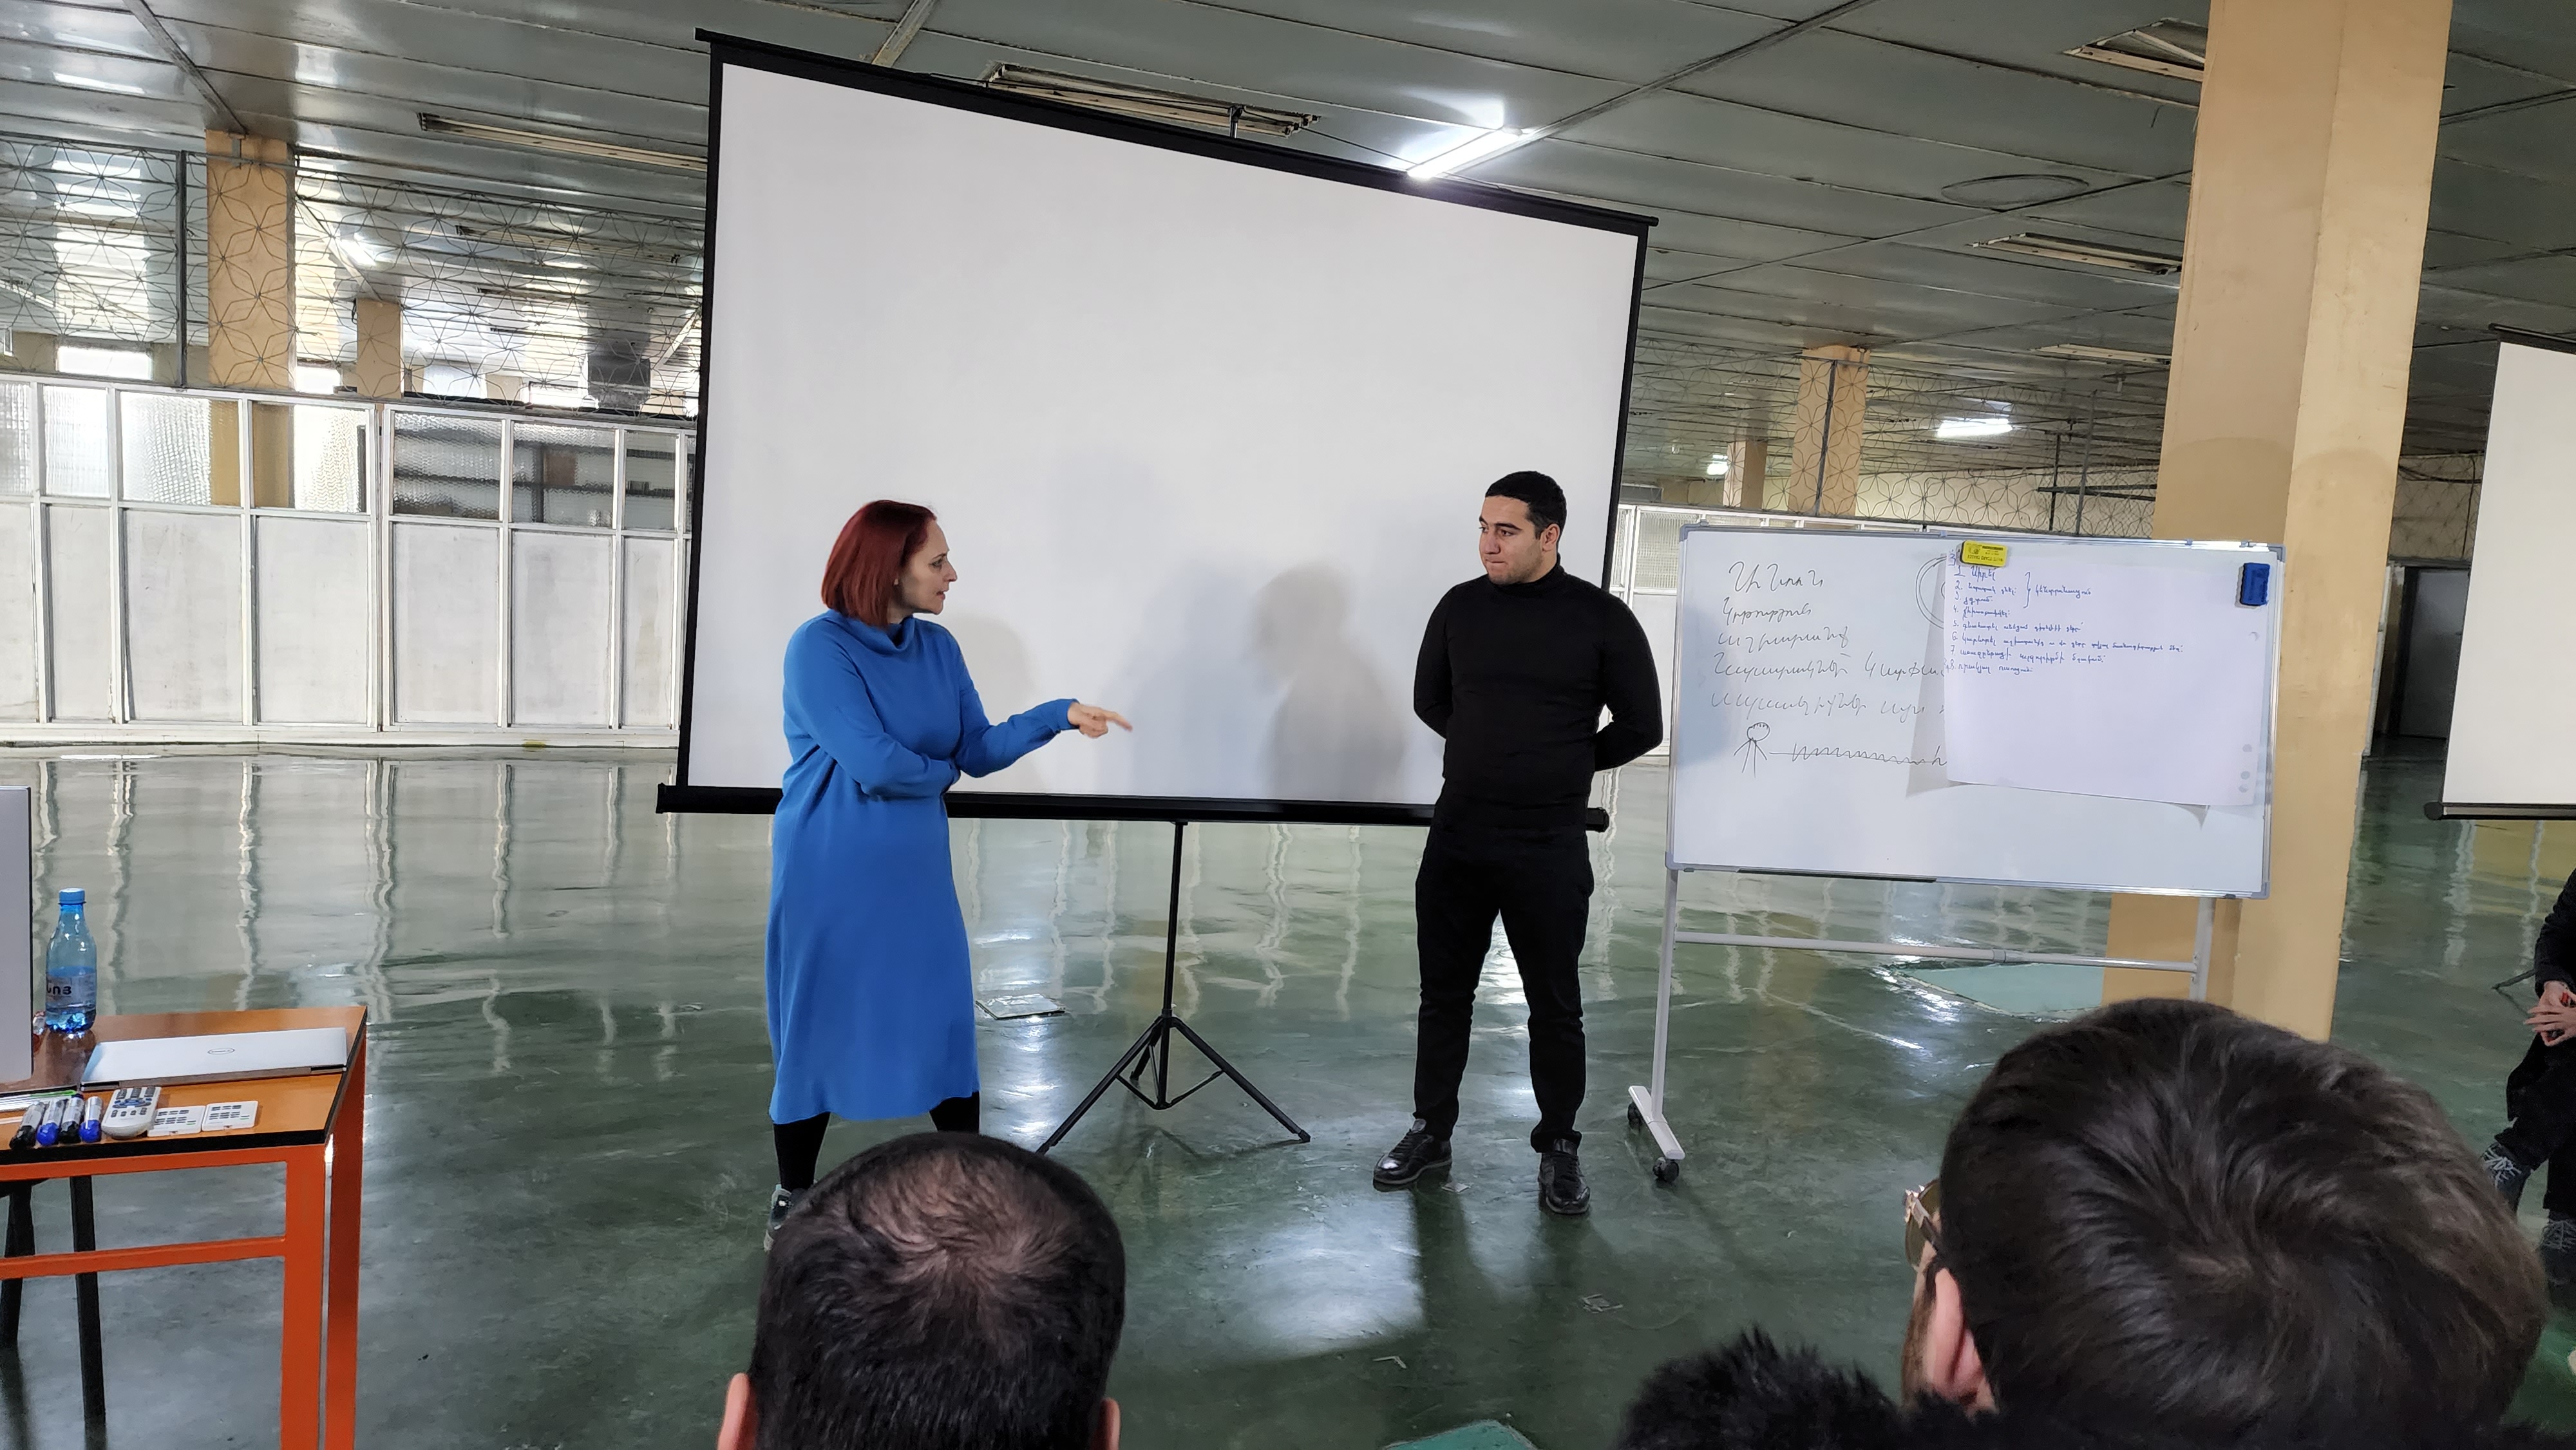 The very interesting, useful and long-awaited course "Soft skills" by Anna Konjoryan, Human Resource Management Specialist of "Synergy Armenia" at the "Aren Mehrabyan" Foundation